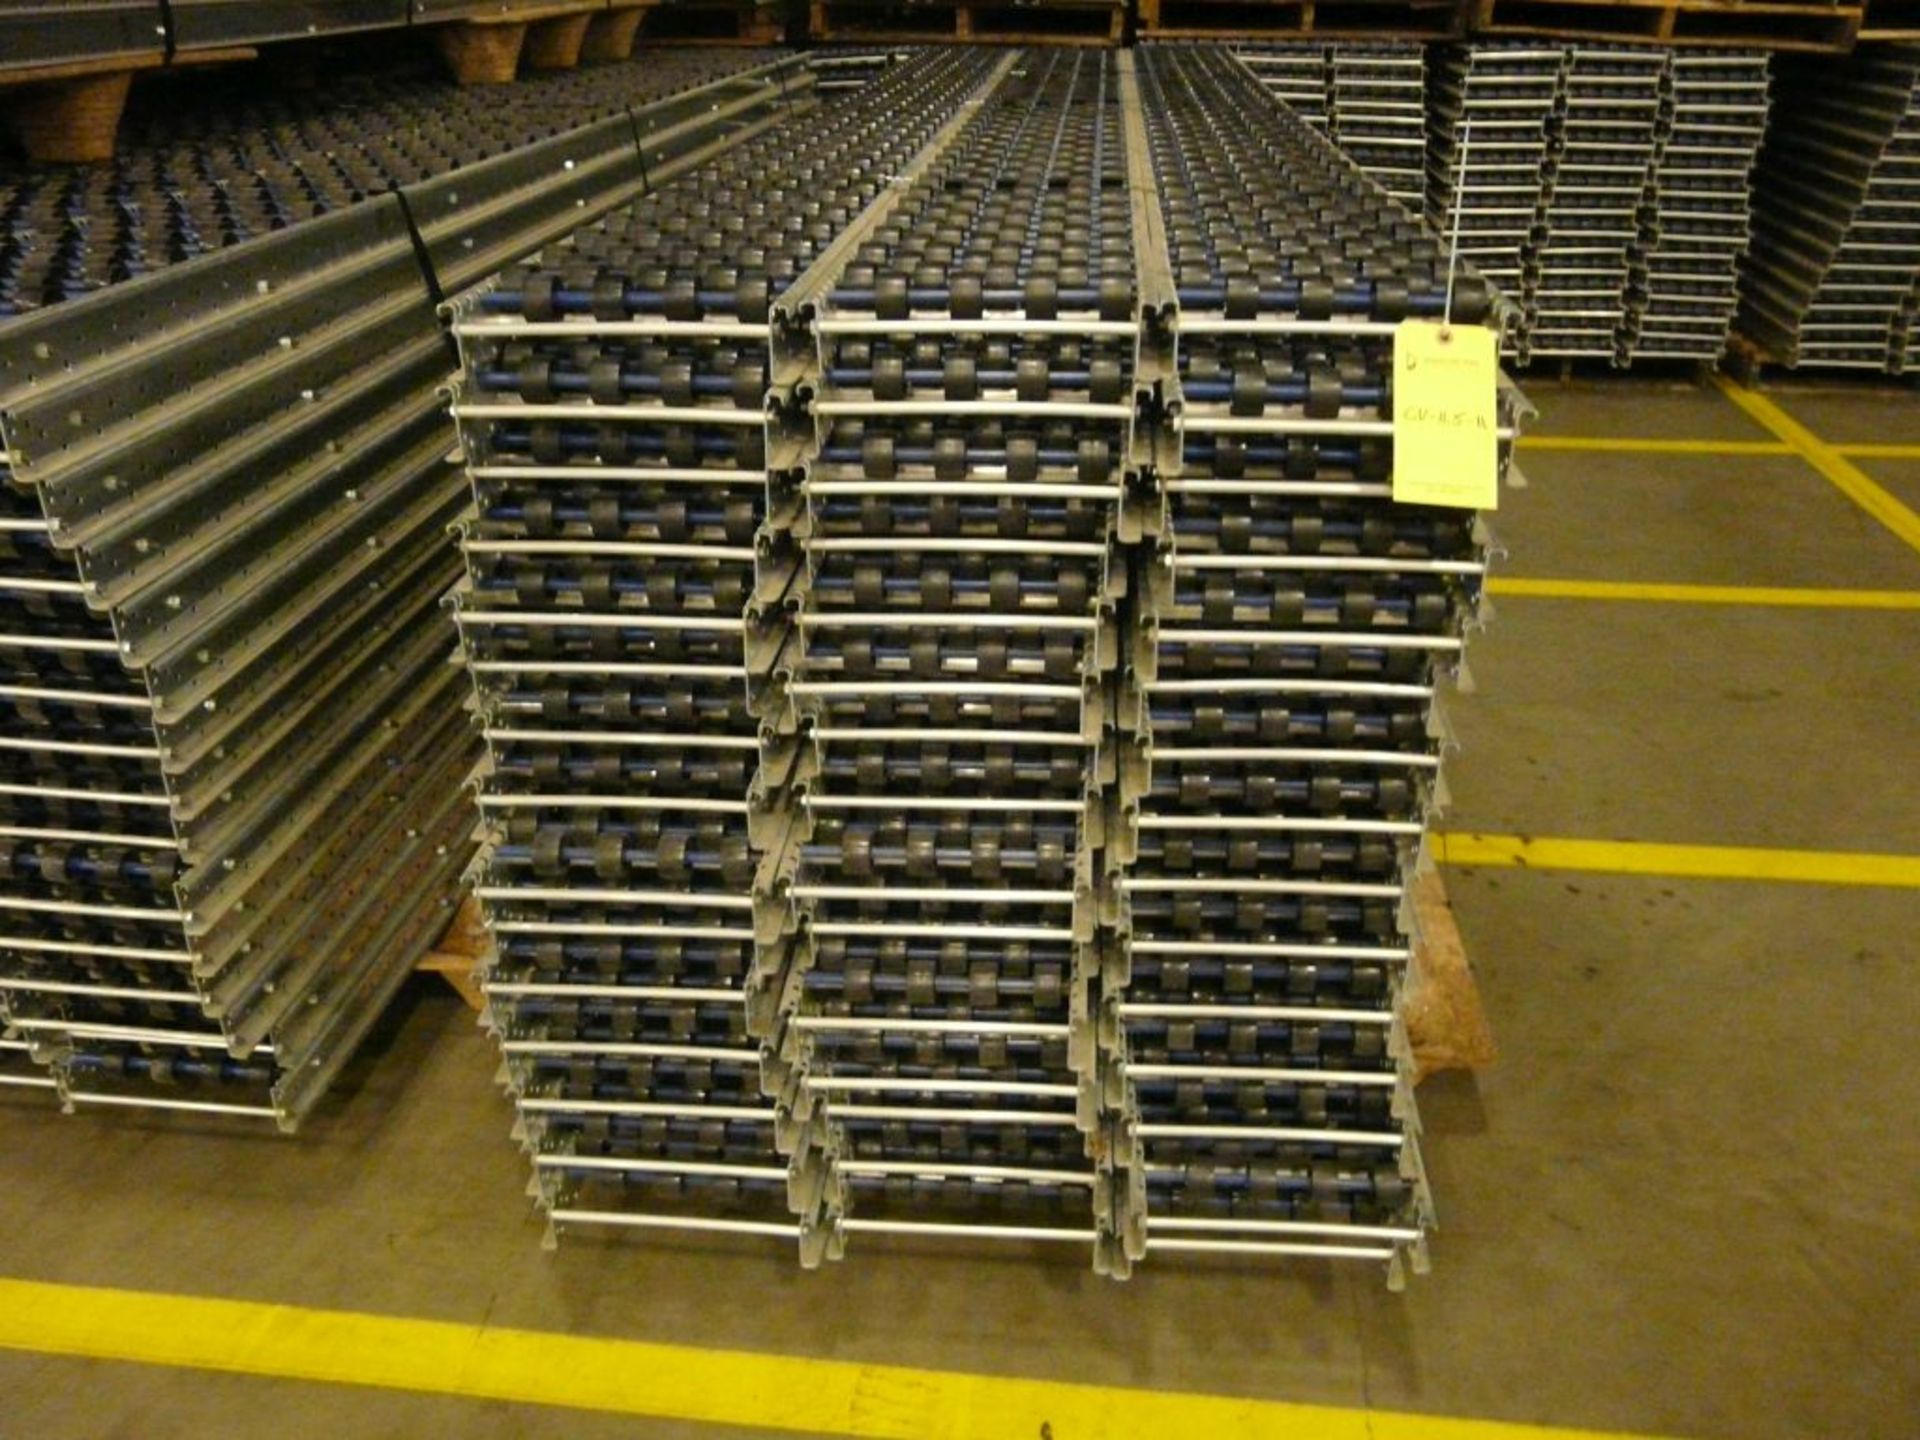 Lot of (90) SpanTrack Wheelbed Carton Flow Conveyors - 11.5'L x 11"W; Tag: 223604 - $30 Lot - Image 2 of 4